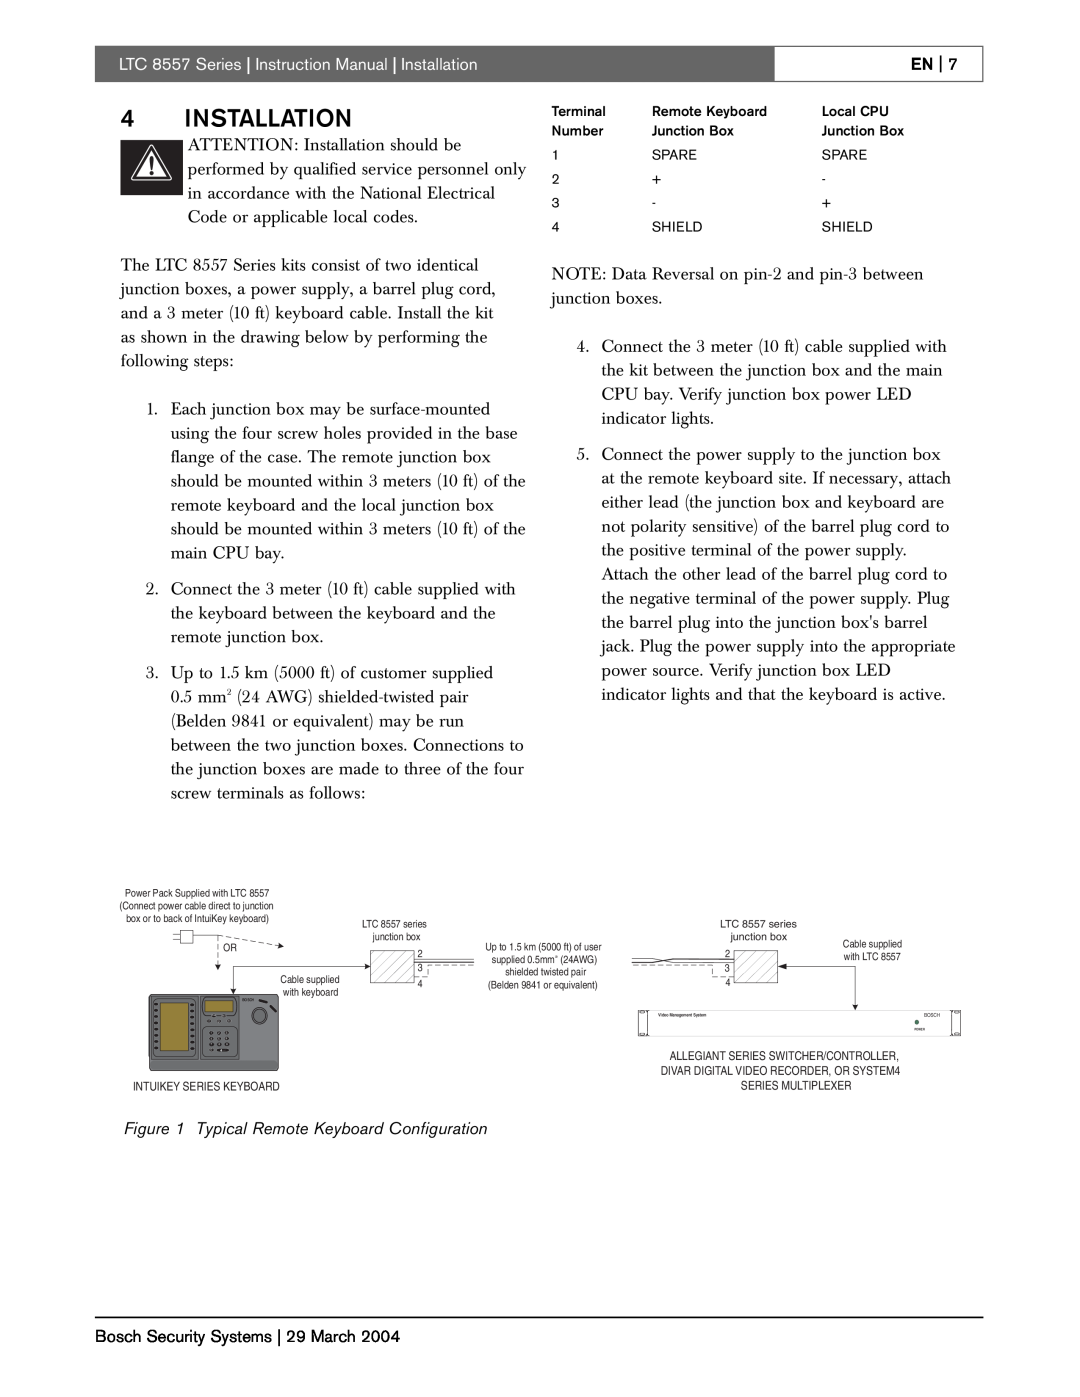 Bosch Appliances LTC 8557 Series Instruction Manual Installation, Typical Remote Keyboard Configuration 